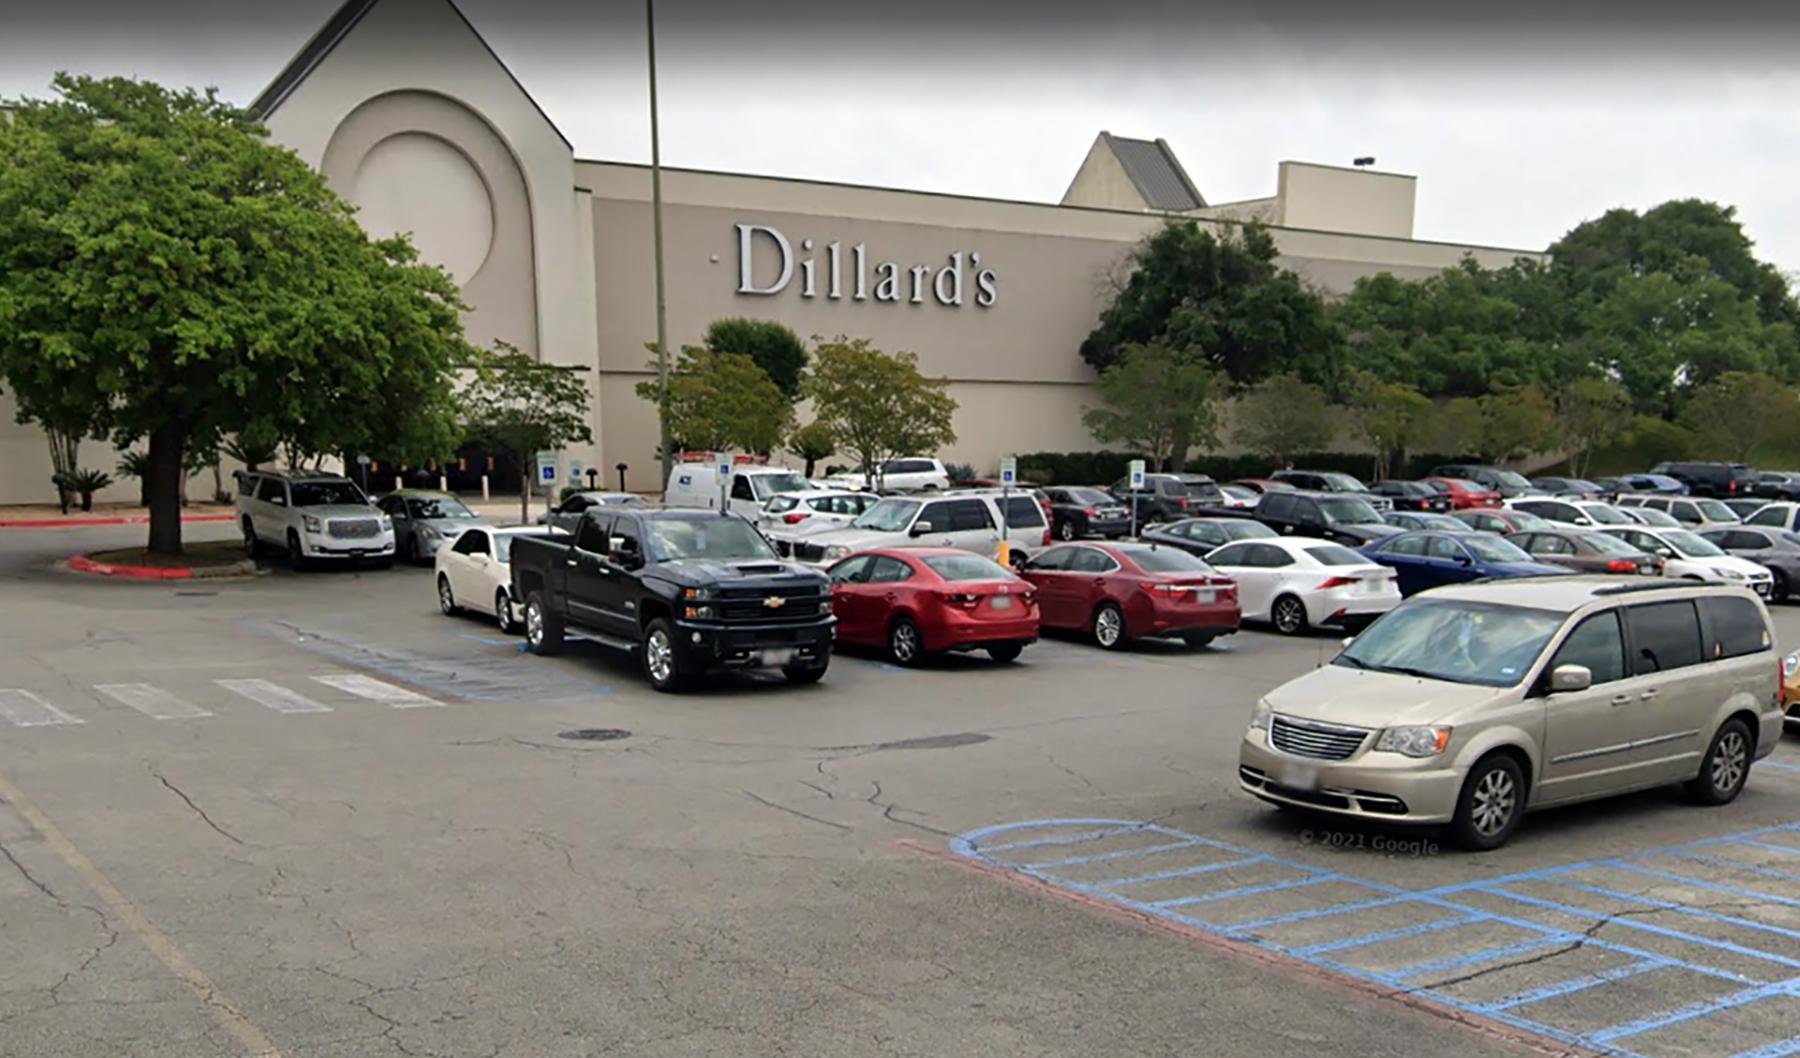 Temple: Dillard's store re-opens in mall